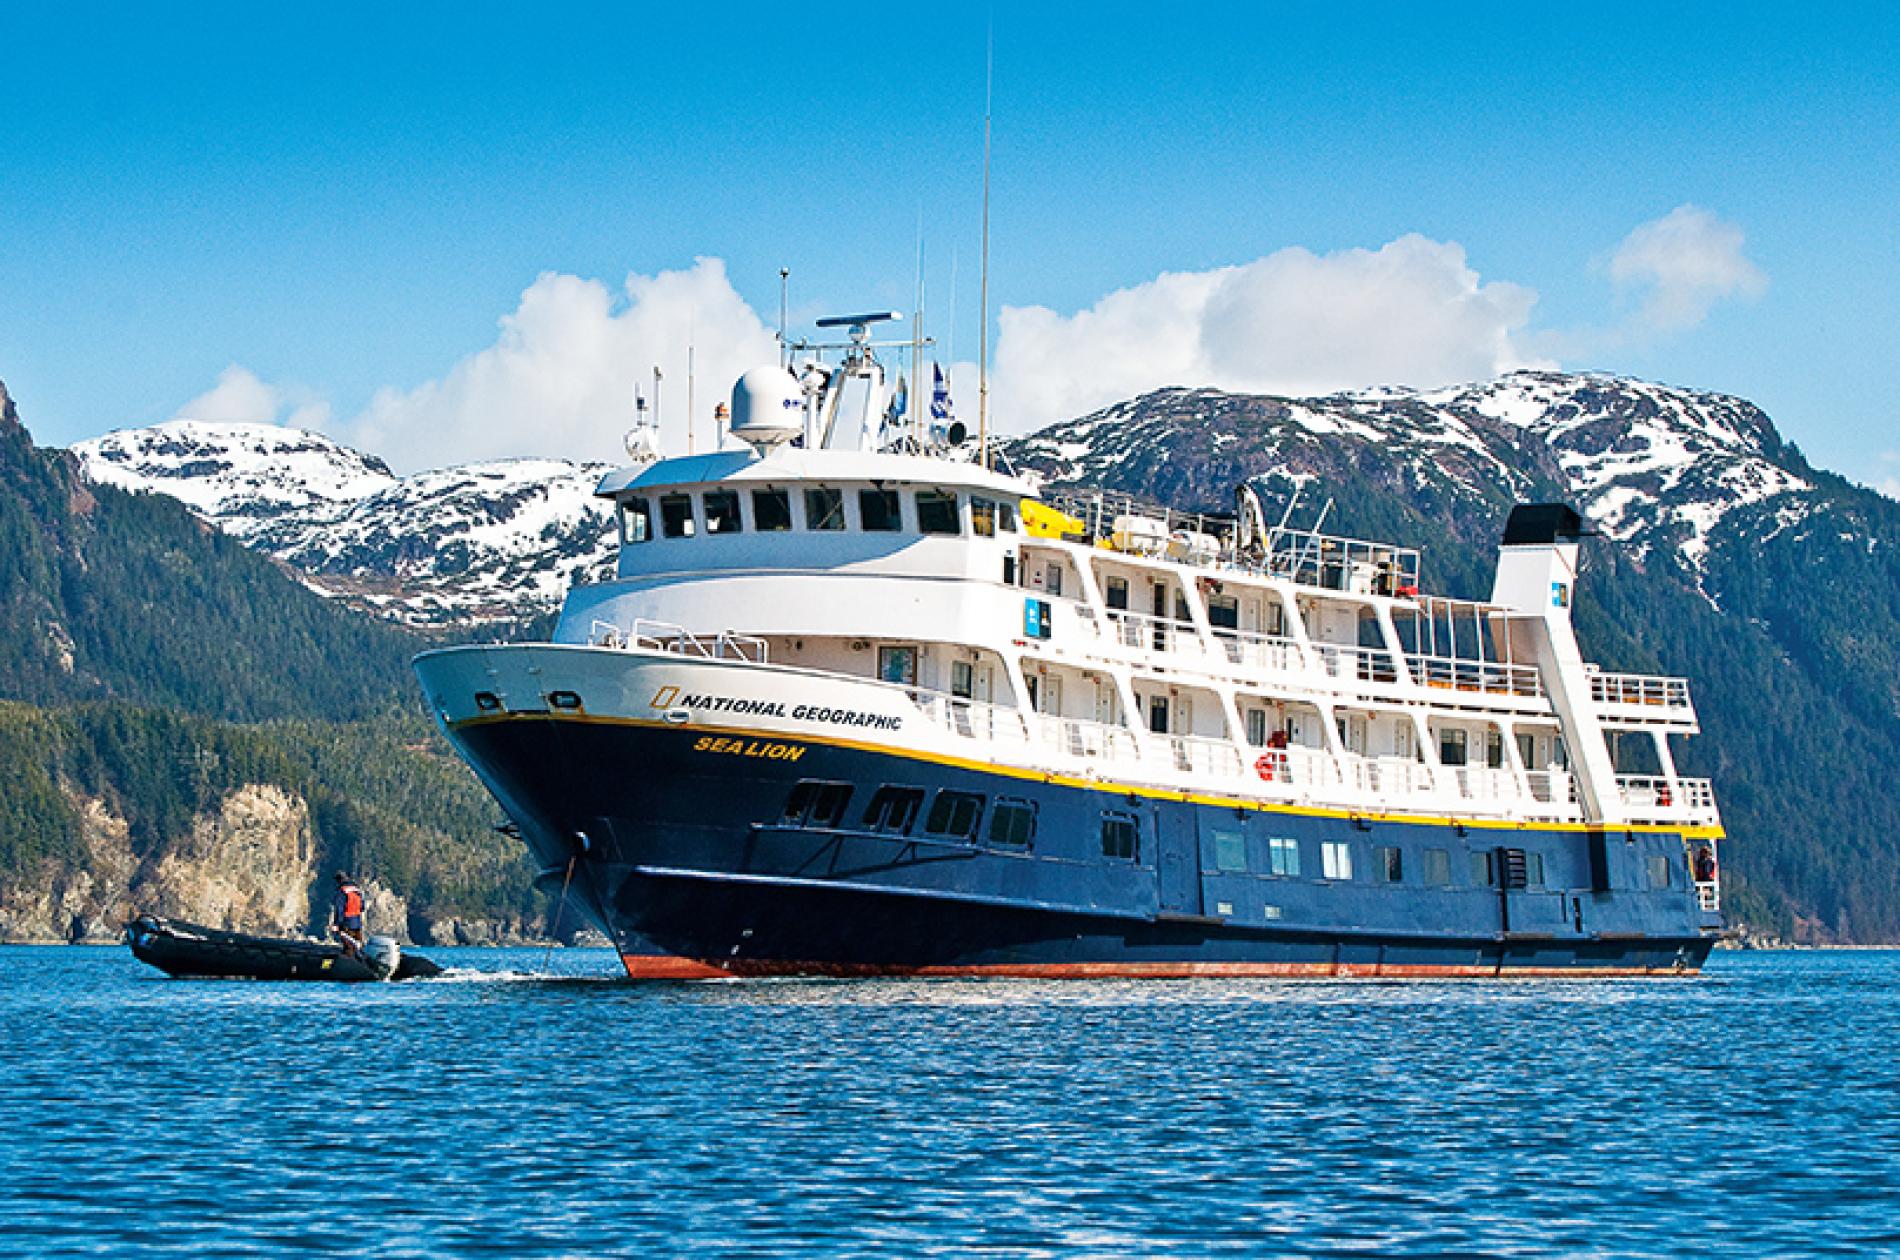 National Geographic to offer cruise, expedition to Beaufort and sea islands